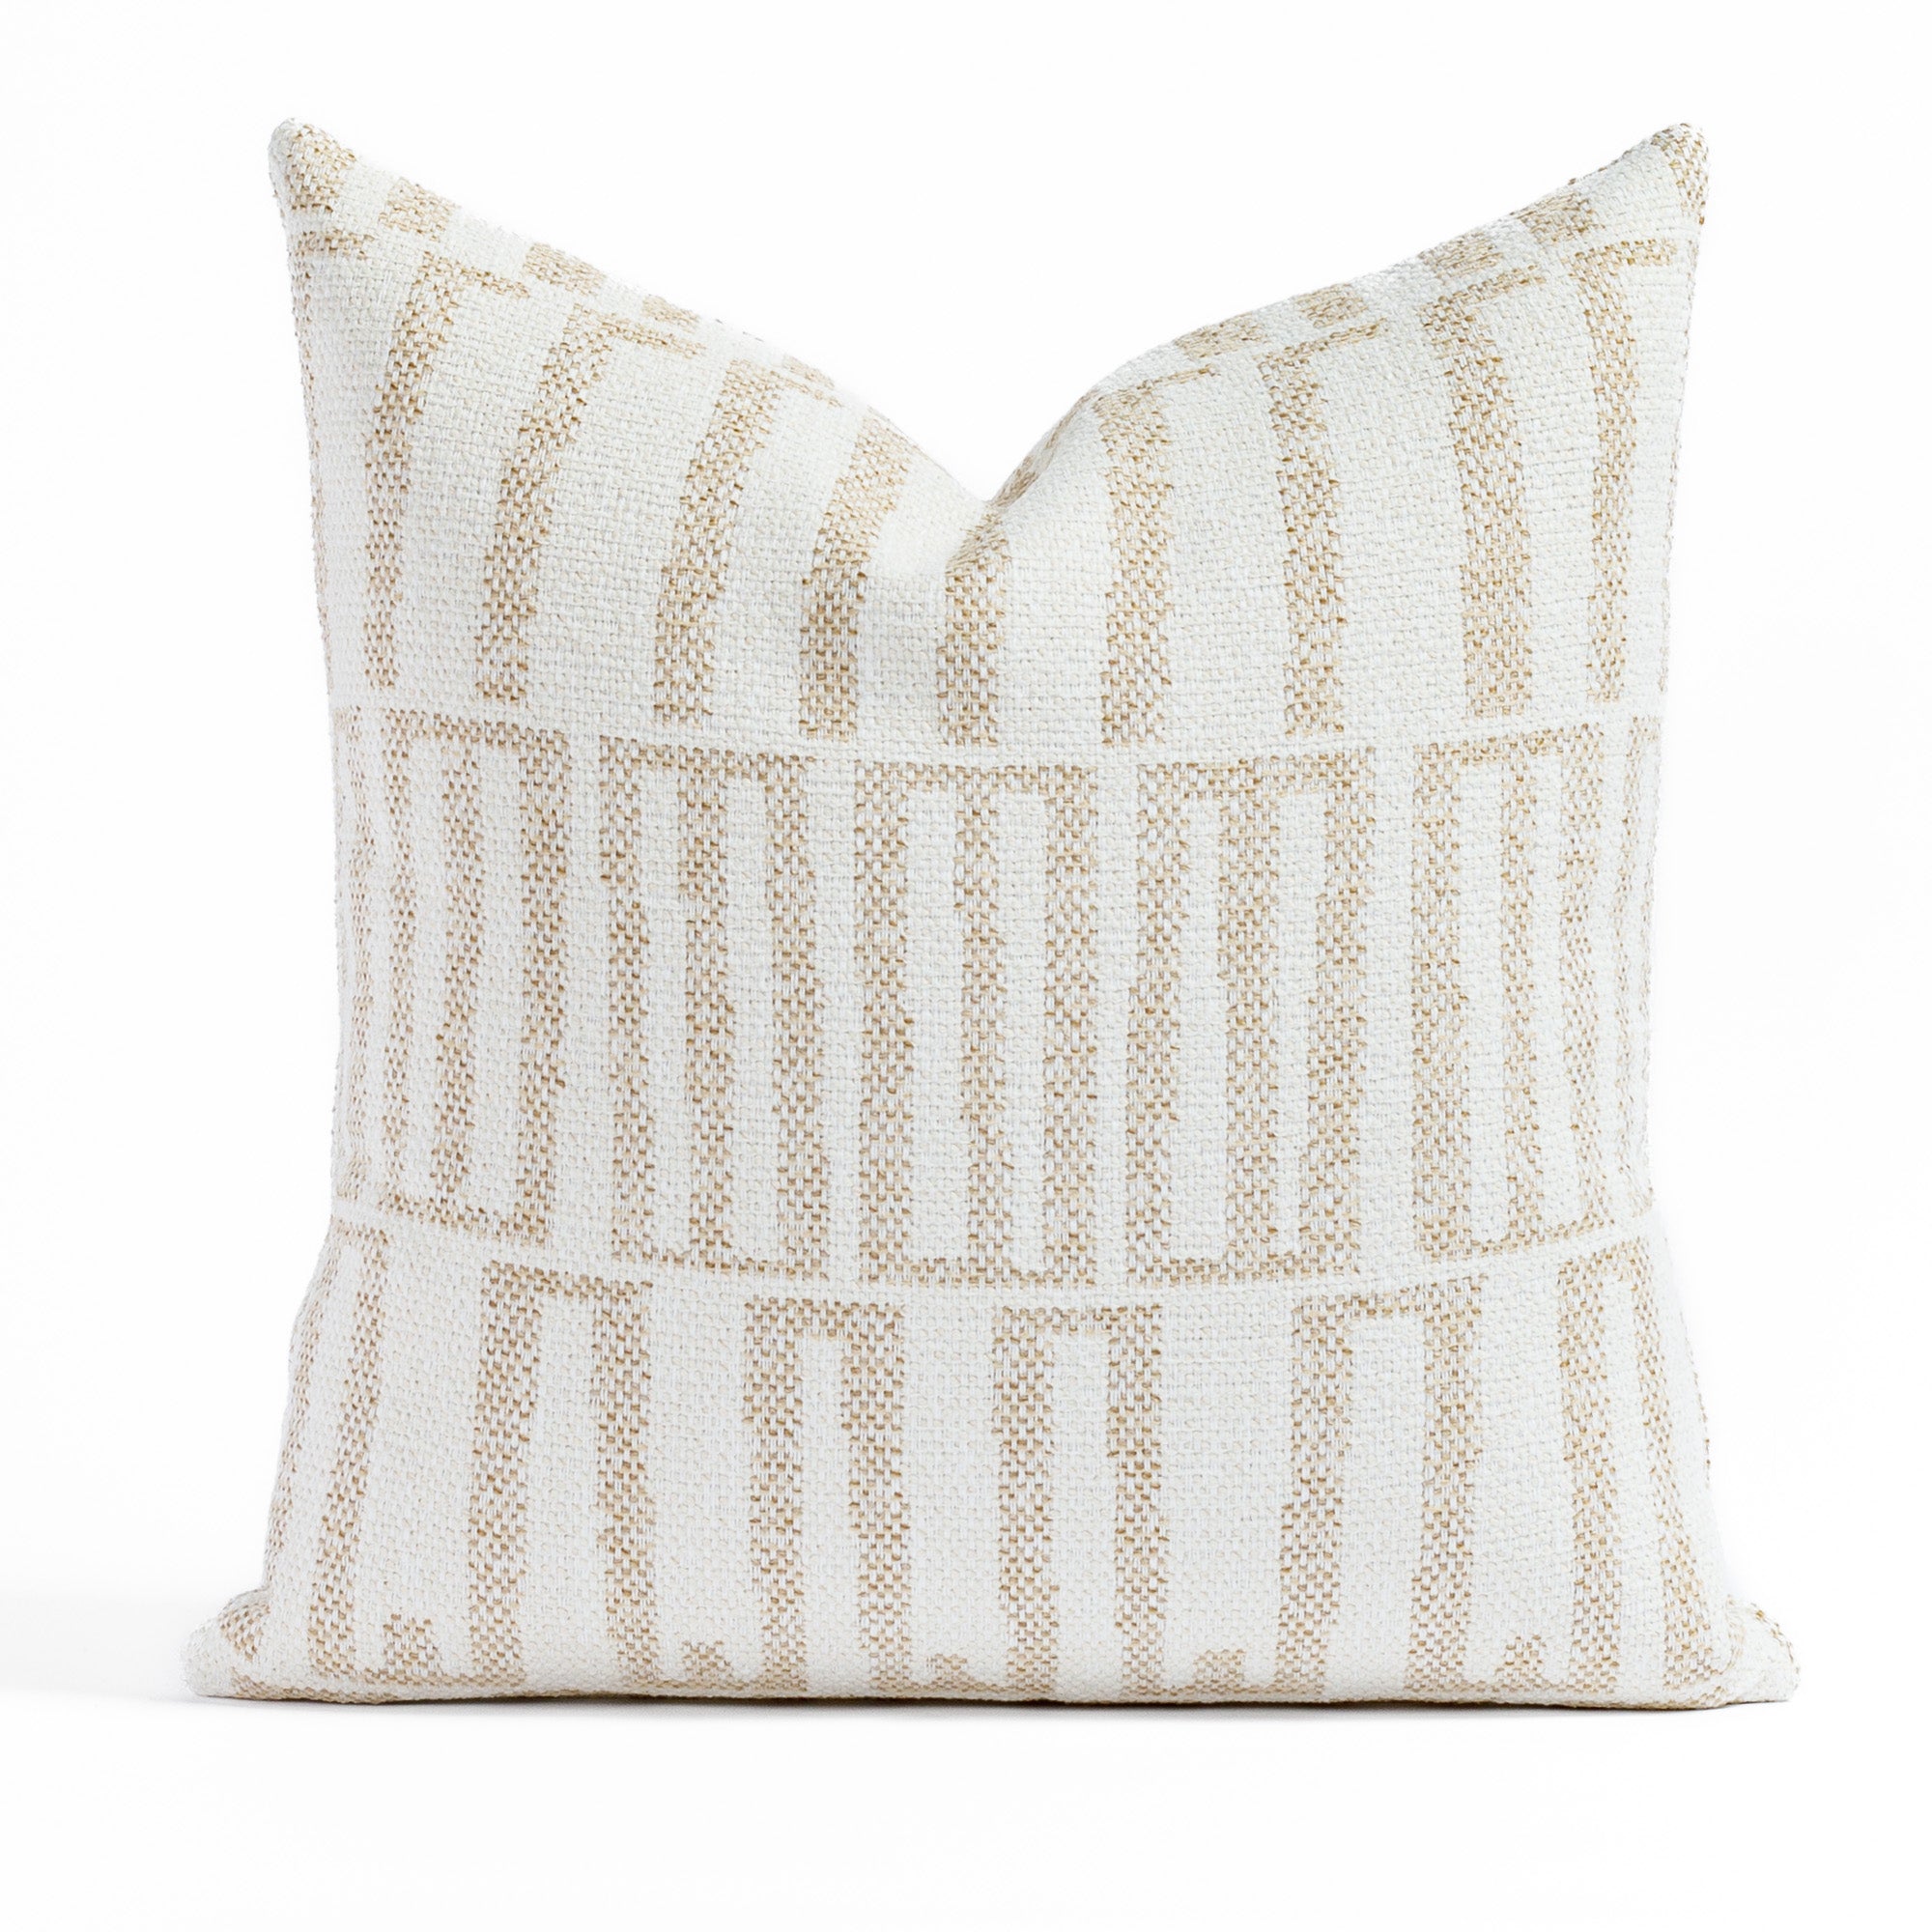 Mallia 20x20 Pillow Toasted Coconut, a white and beige graphic organic geometric patterned outdoor throw pillow from Tonic Living 